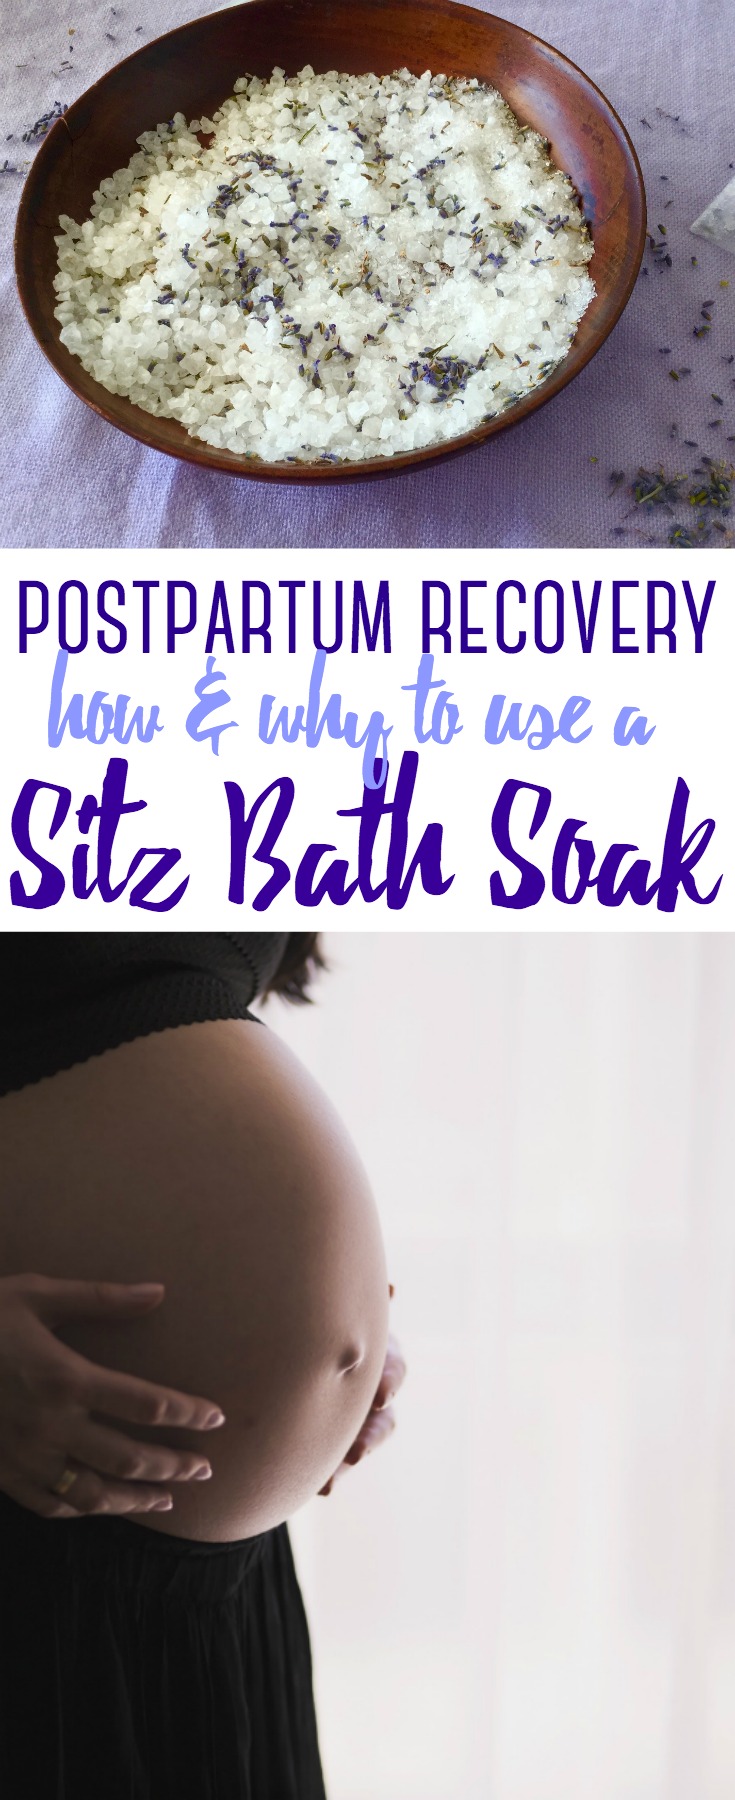 A postpartum sitz bath soak is a wonderful way to recover after pregnancy and delivery. A sitz bath with essential oils can help soothe skin and repair damaged tissue while helping to relax. 
